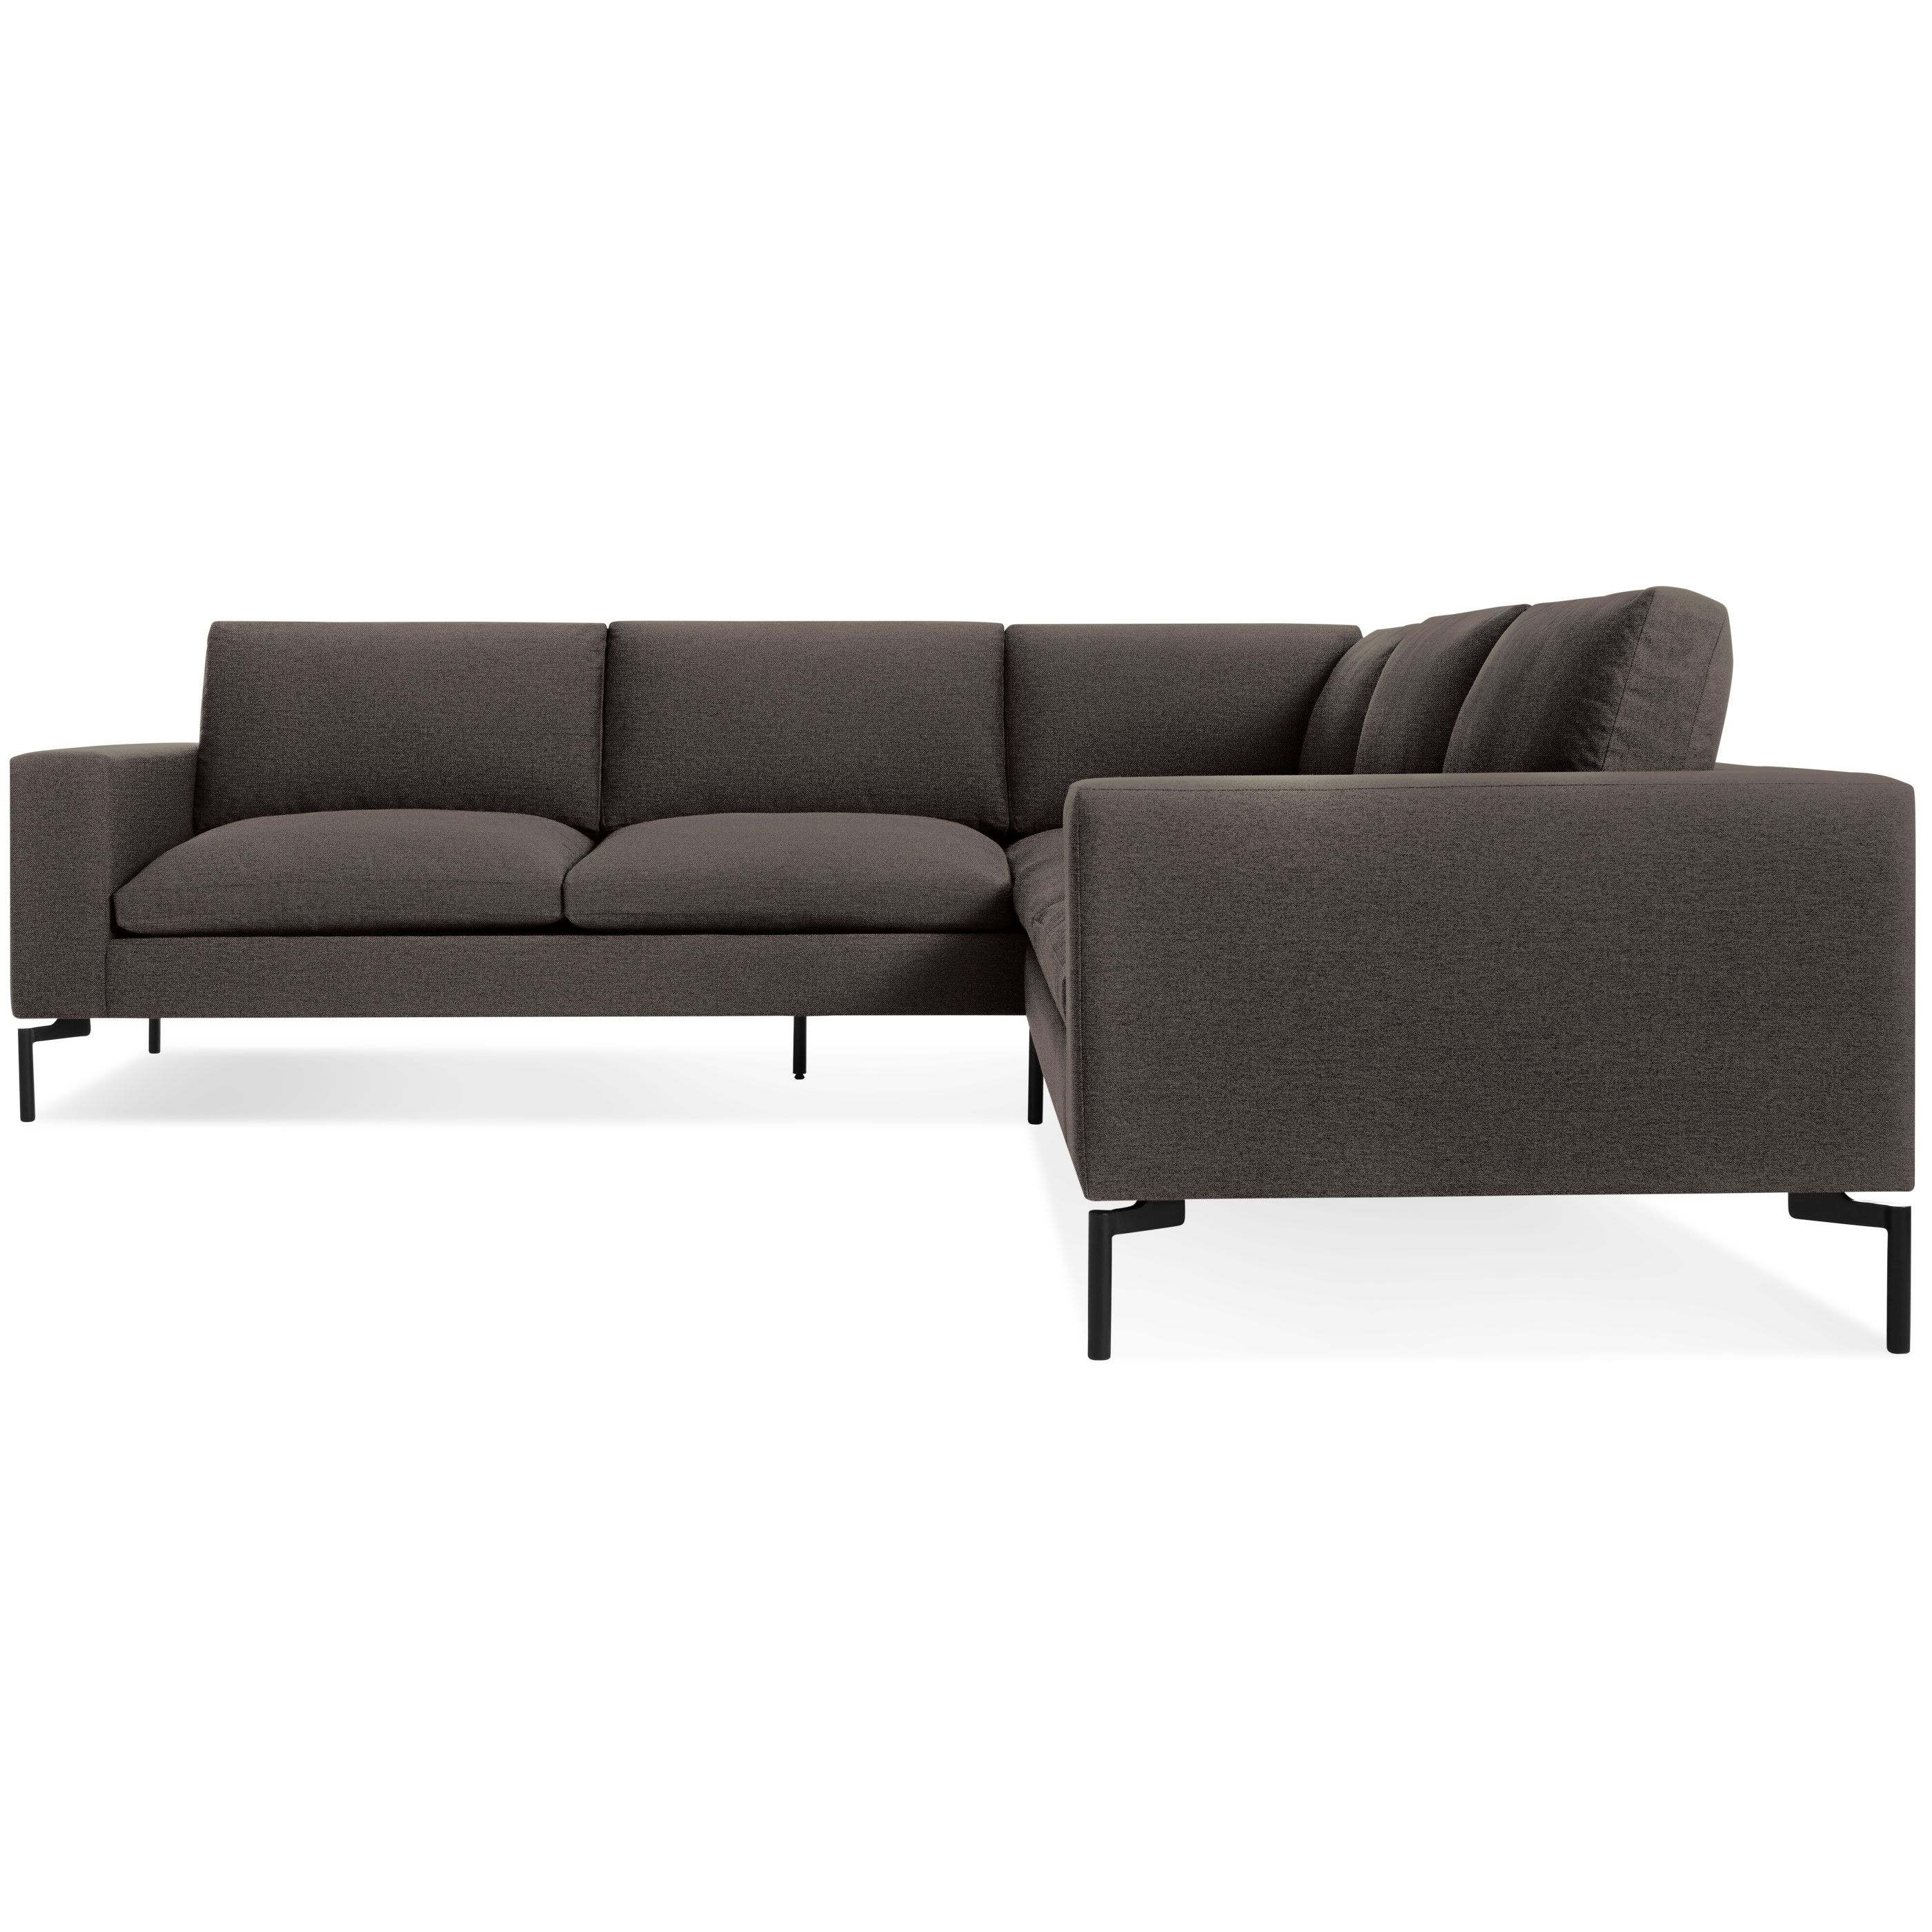 New Standard Small Sectional Sofa – Modern Sofas (View 11 of 20)